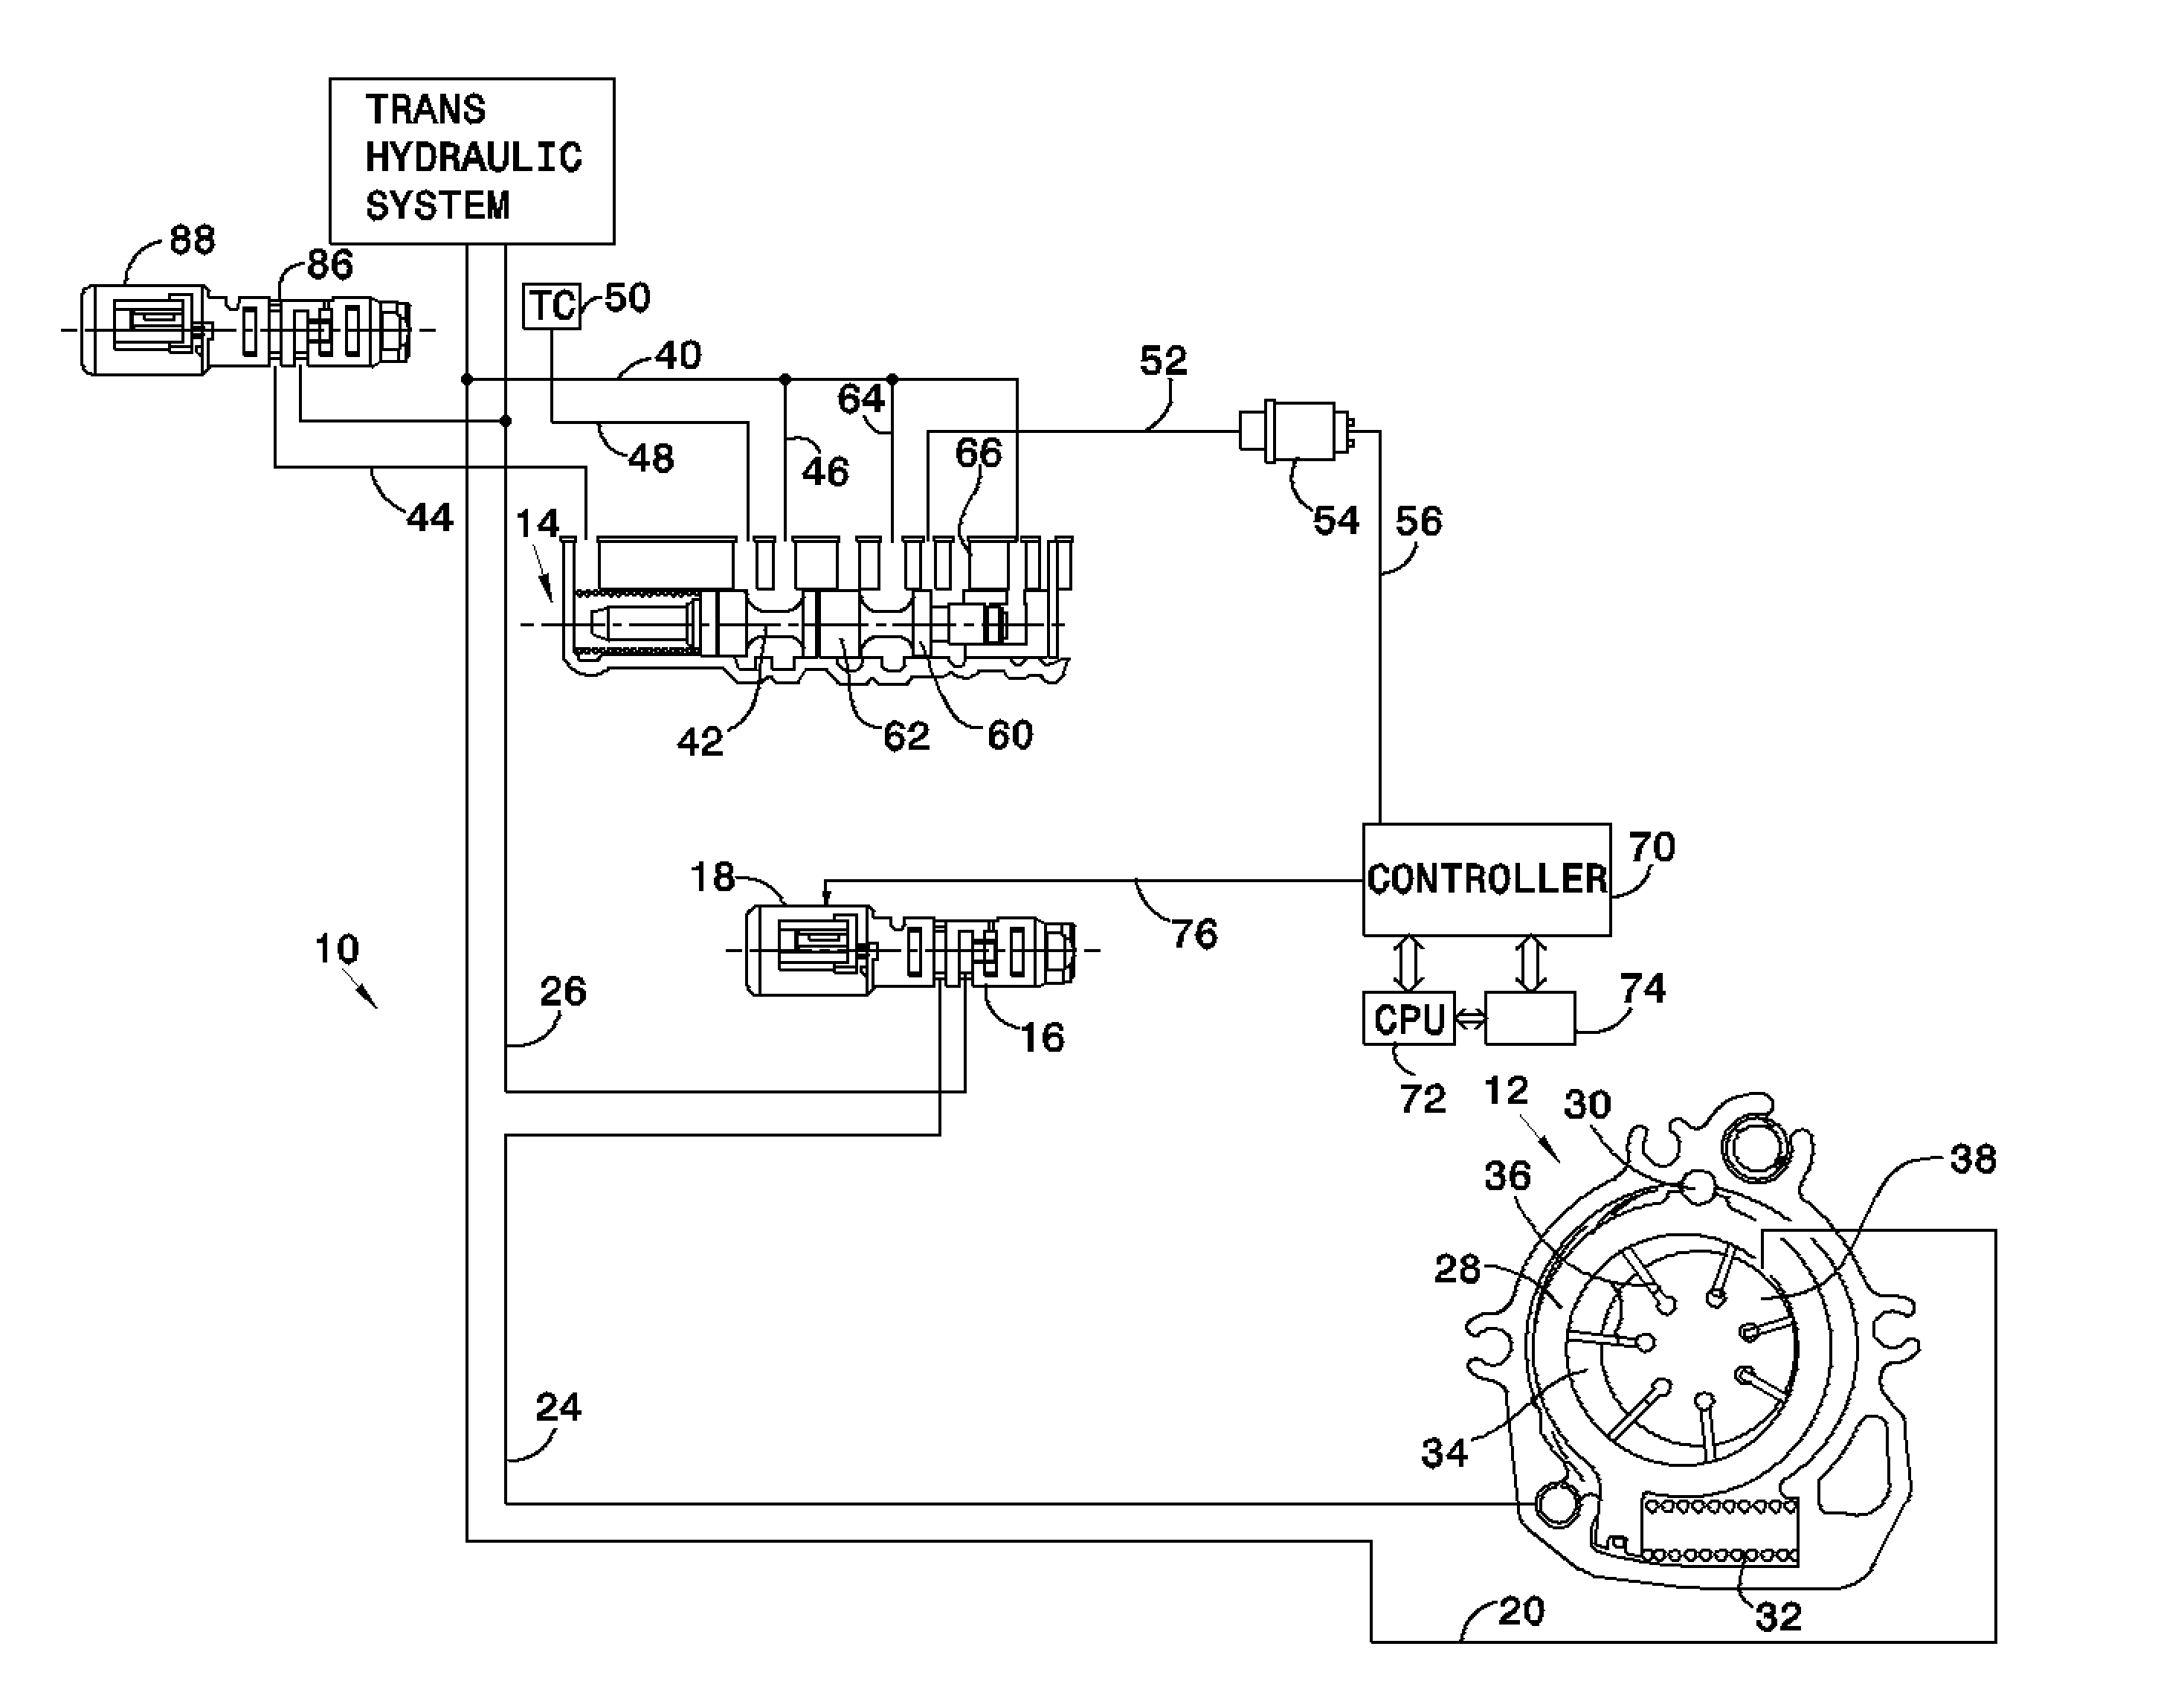 Variable displacement transmission pump control